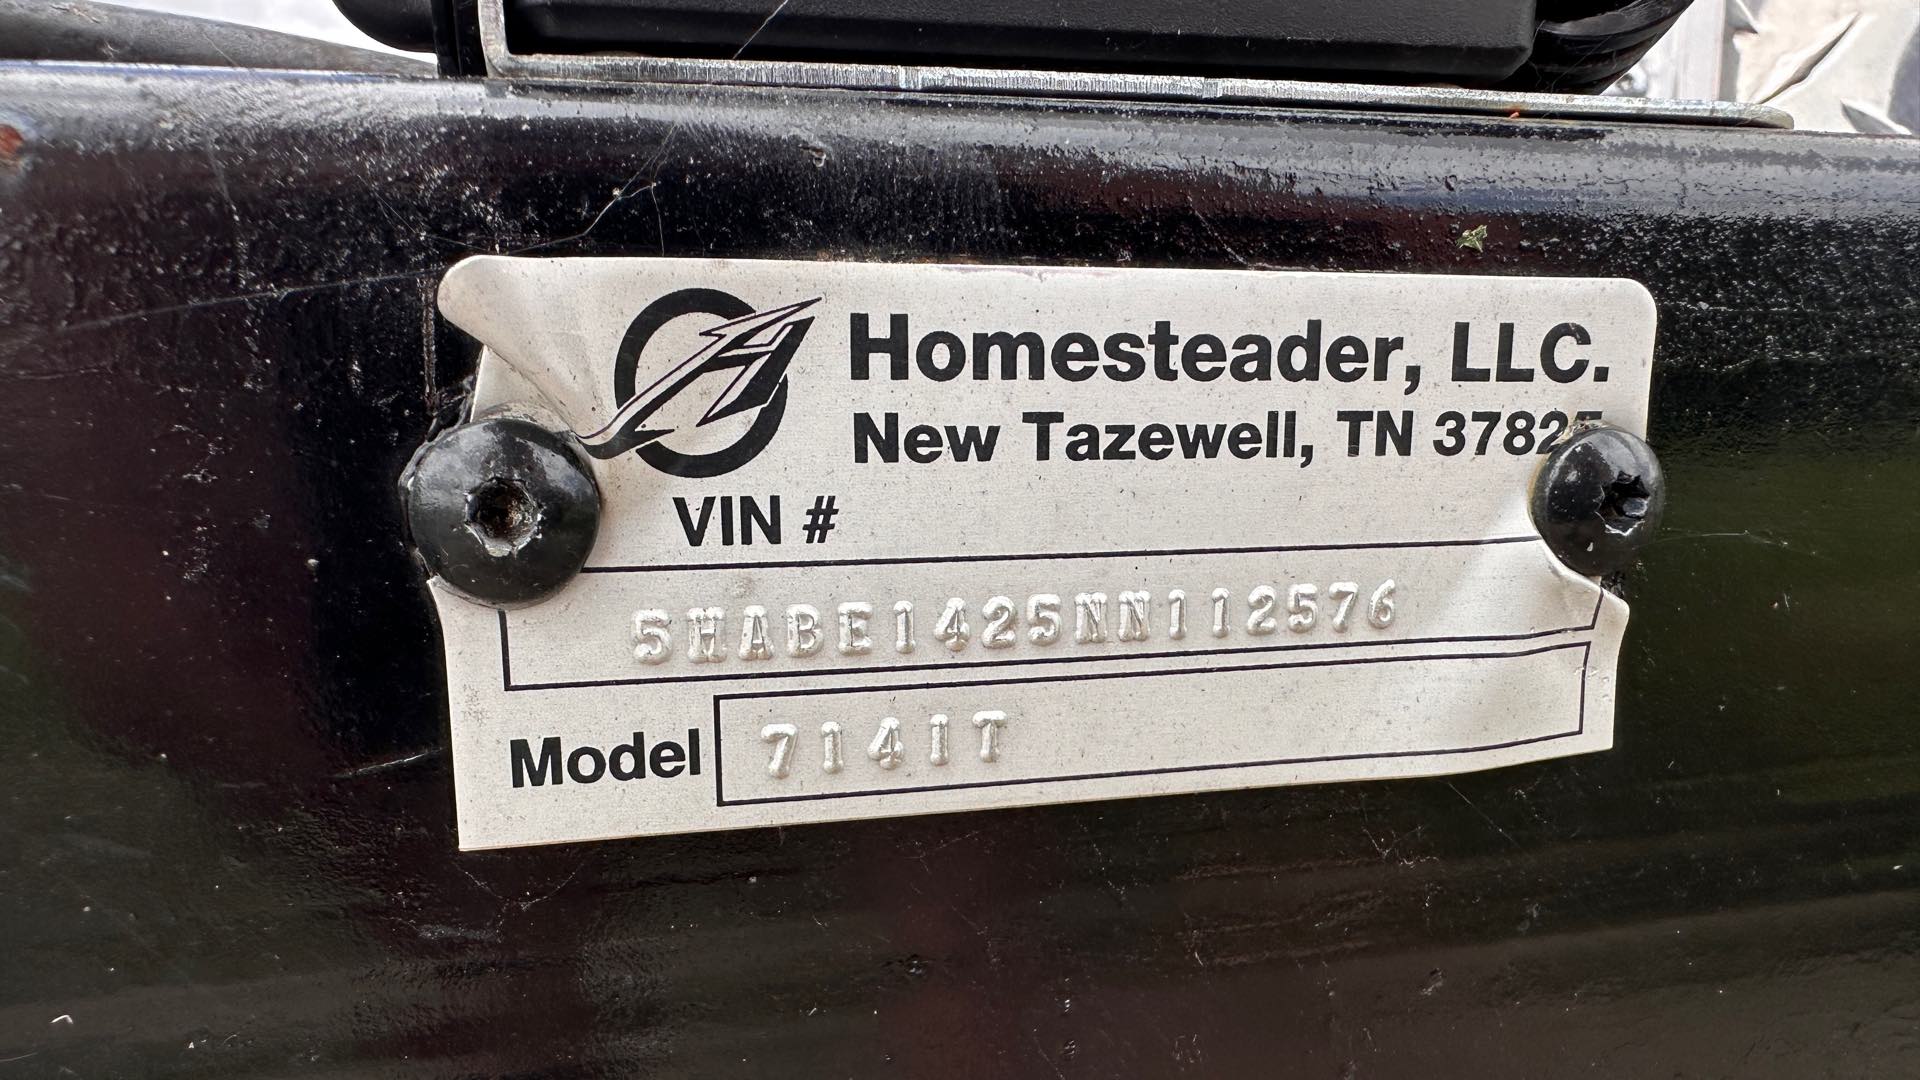 1992 Homestead Trailer at ATVs and More